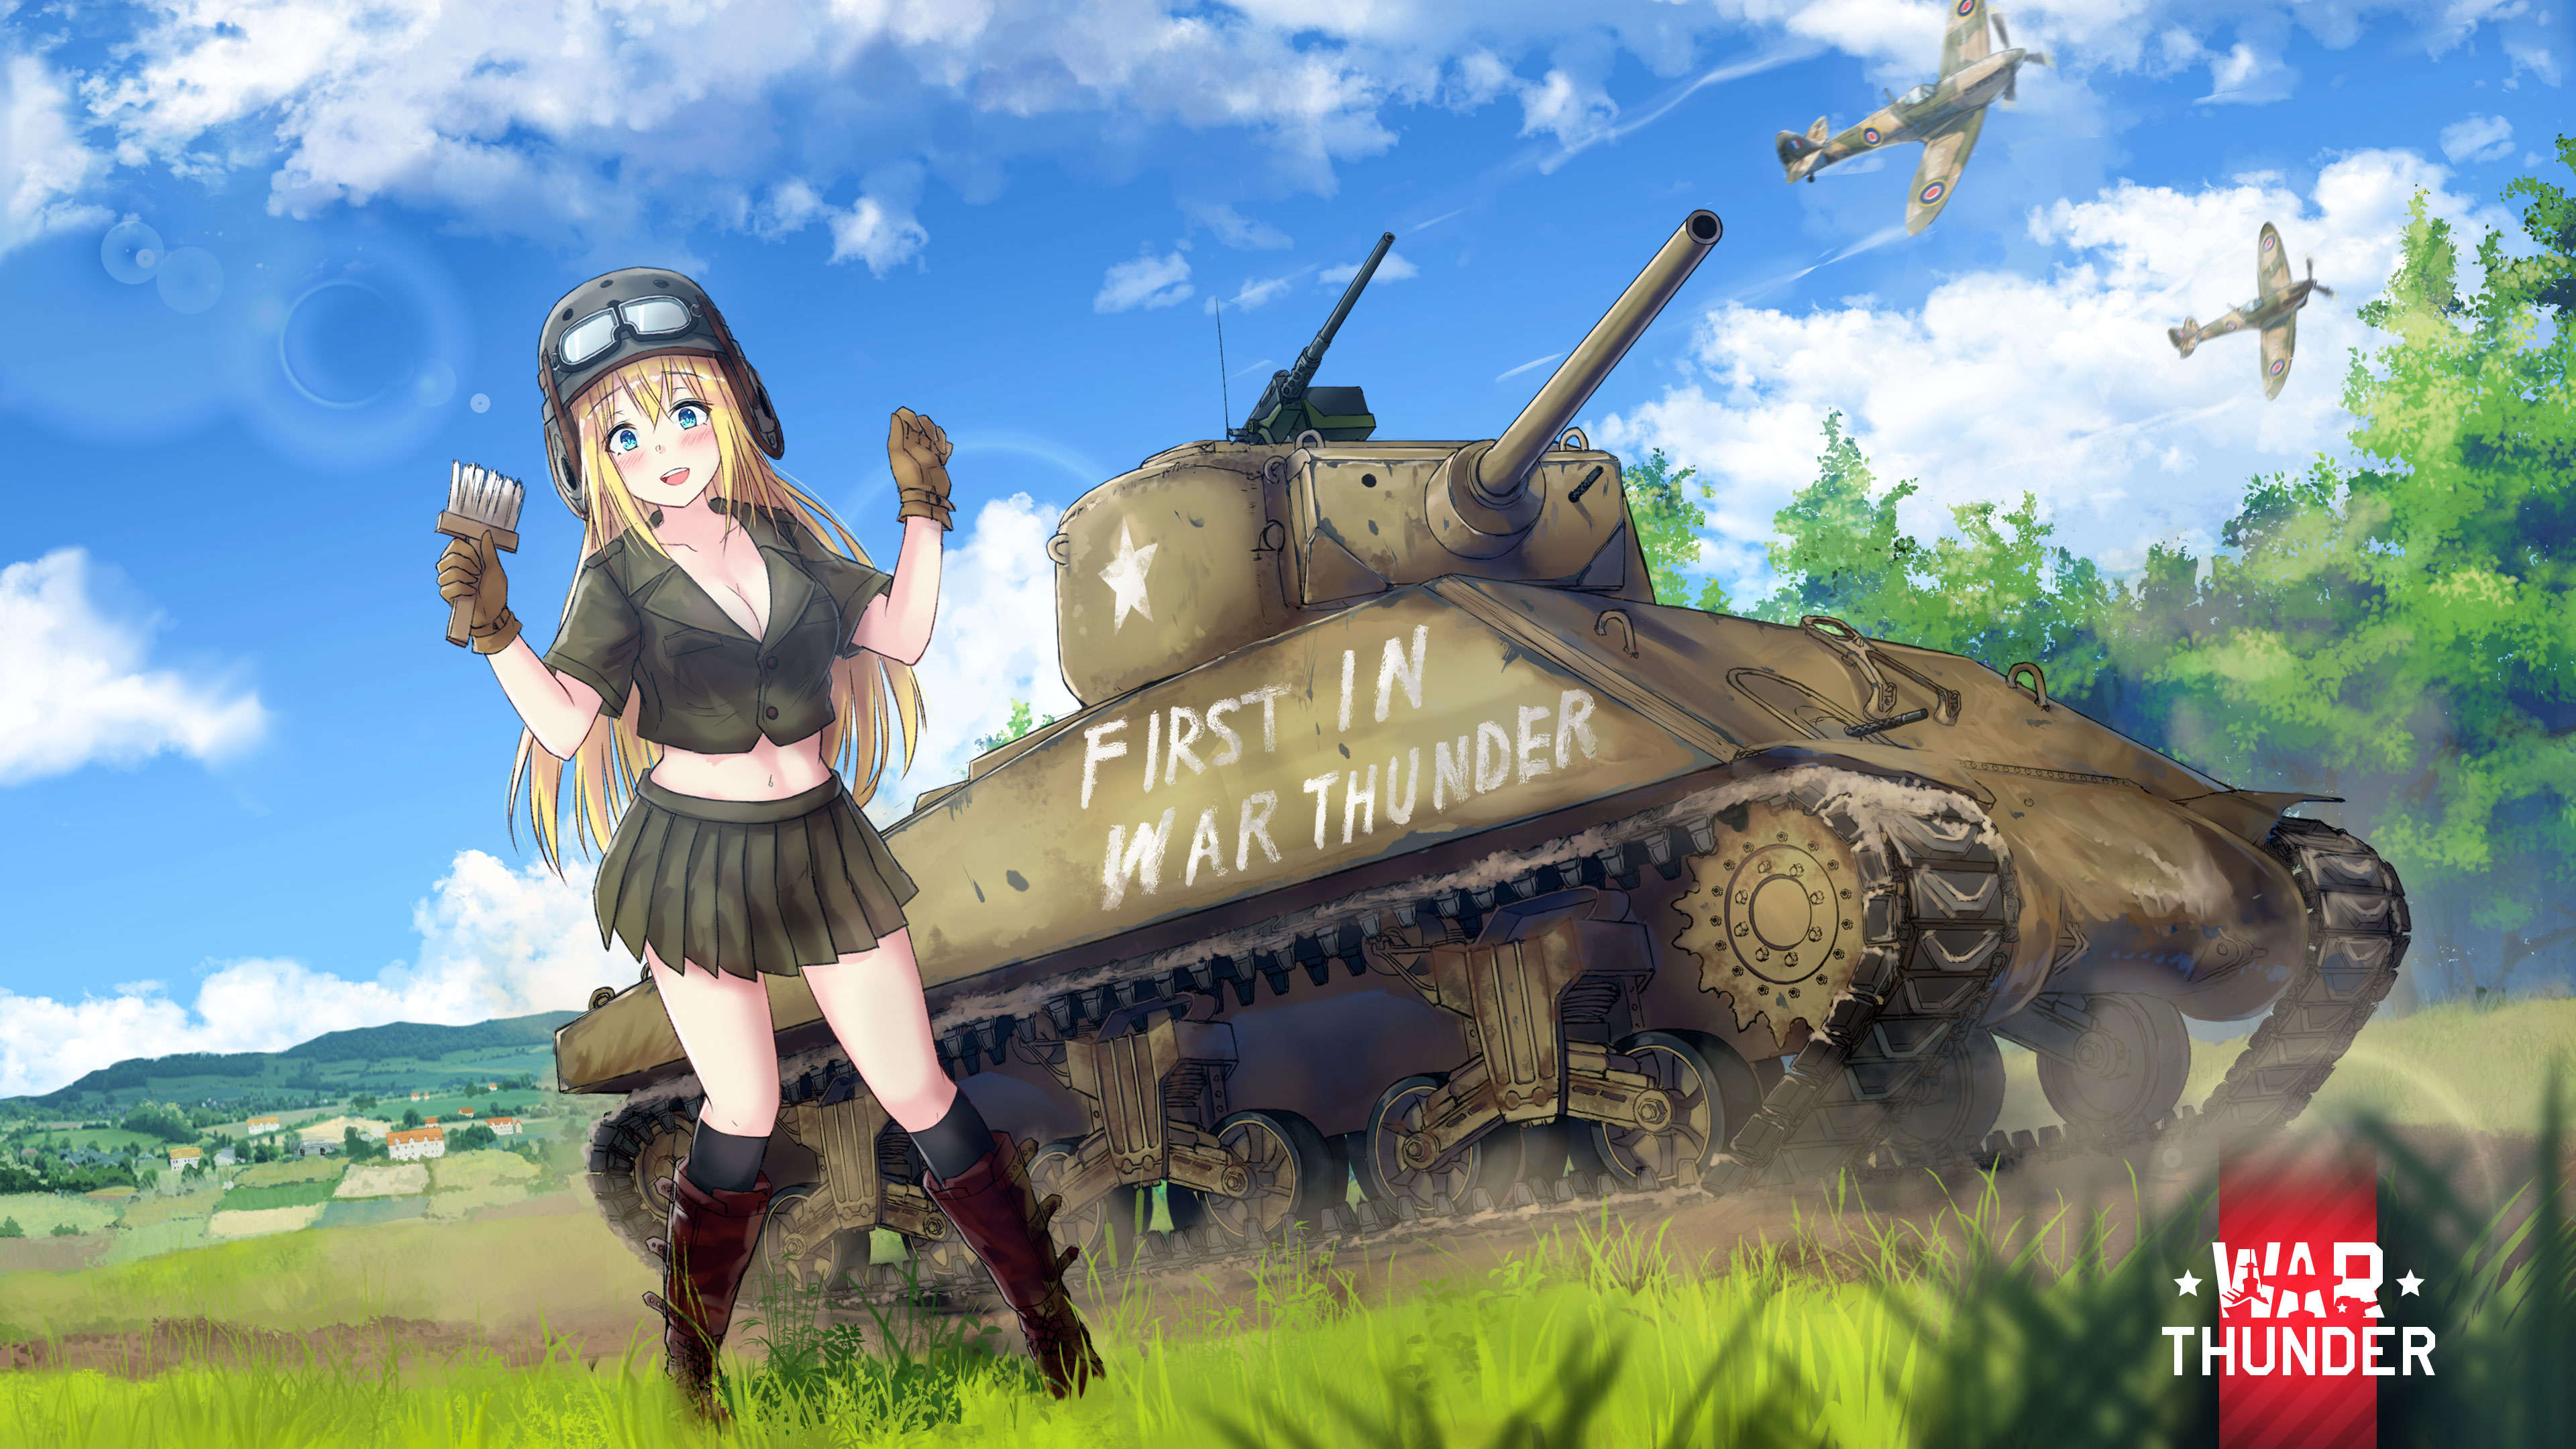 Anime 3840x2160 anime girls M4 Sherman field Military Hat military uniform blonde miniskirt blue eyes leather boots War Thunder paint brushes clouds airplane goggles tank sky gloves looking at viewer blushing standing cleavage skirt military aircraft military military vehicle